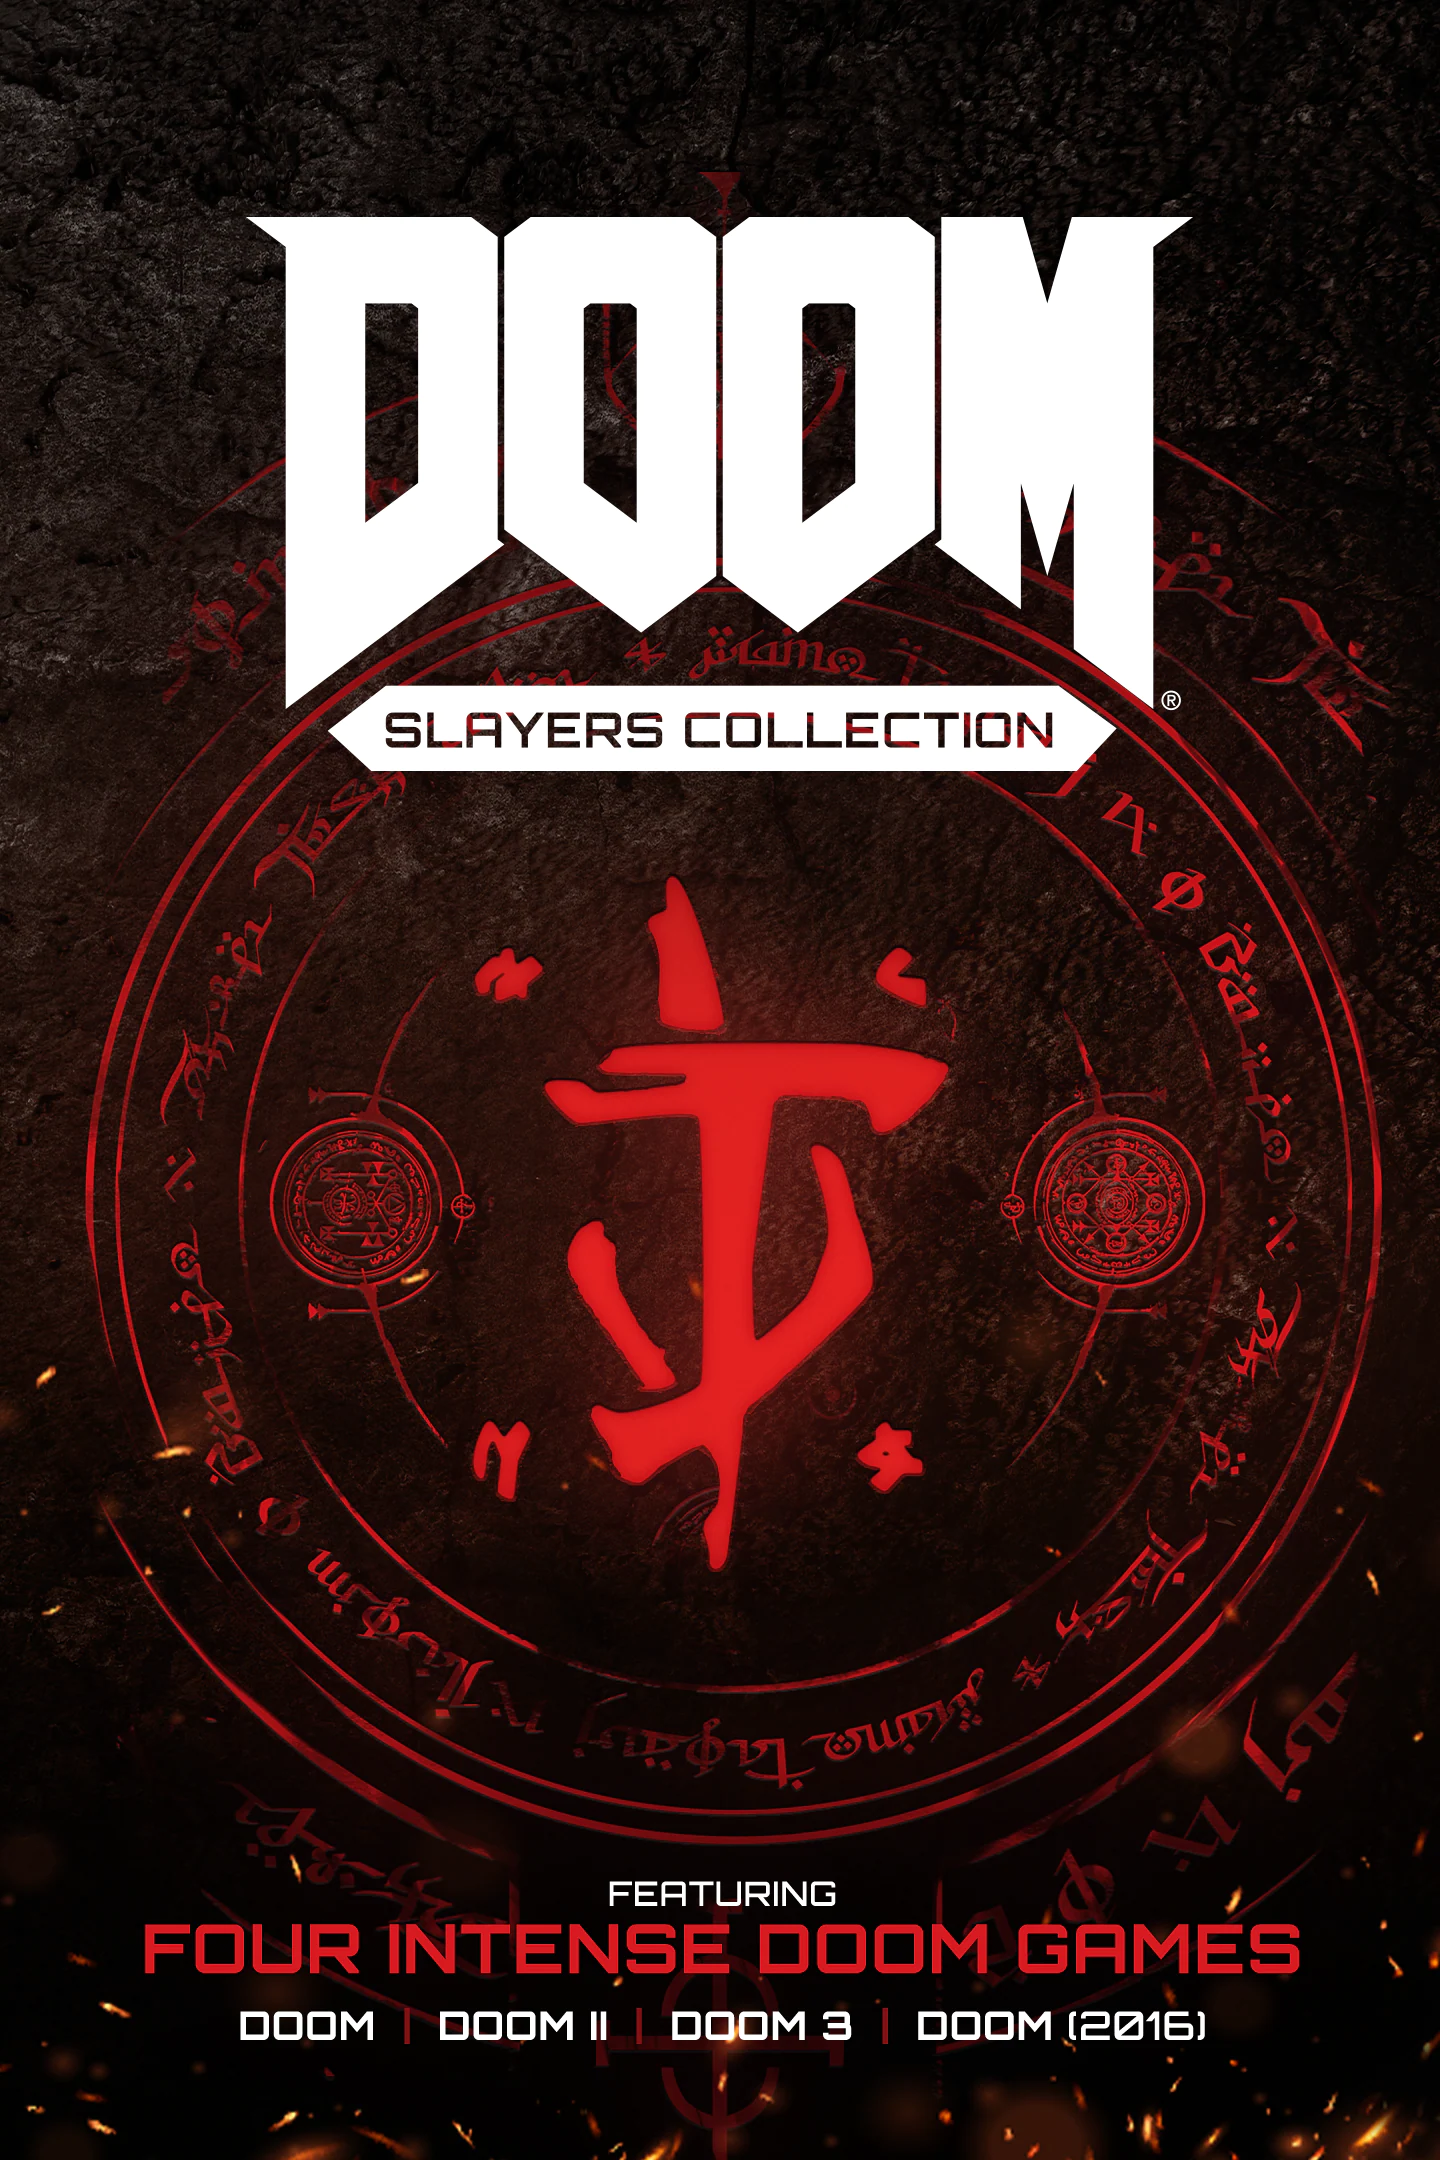 Doom collection. Doom Slayers collection (ps4). Doom - Slayers collection [ps4, русская версия]. Doom - Slayers collection [Xbox one русская версия]. Doom Slayers collection Xbox.